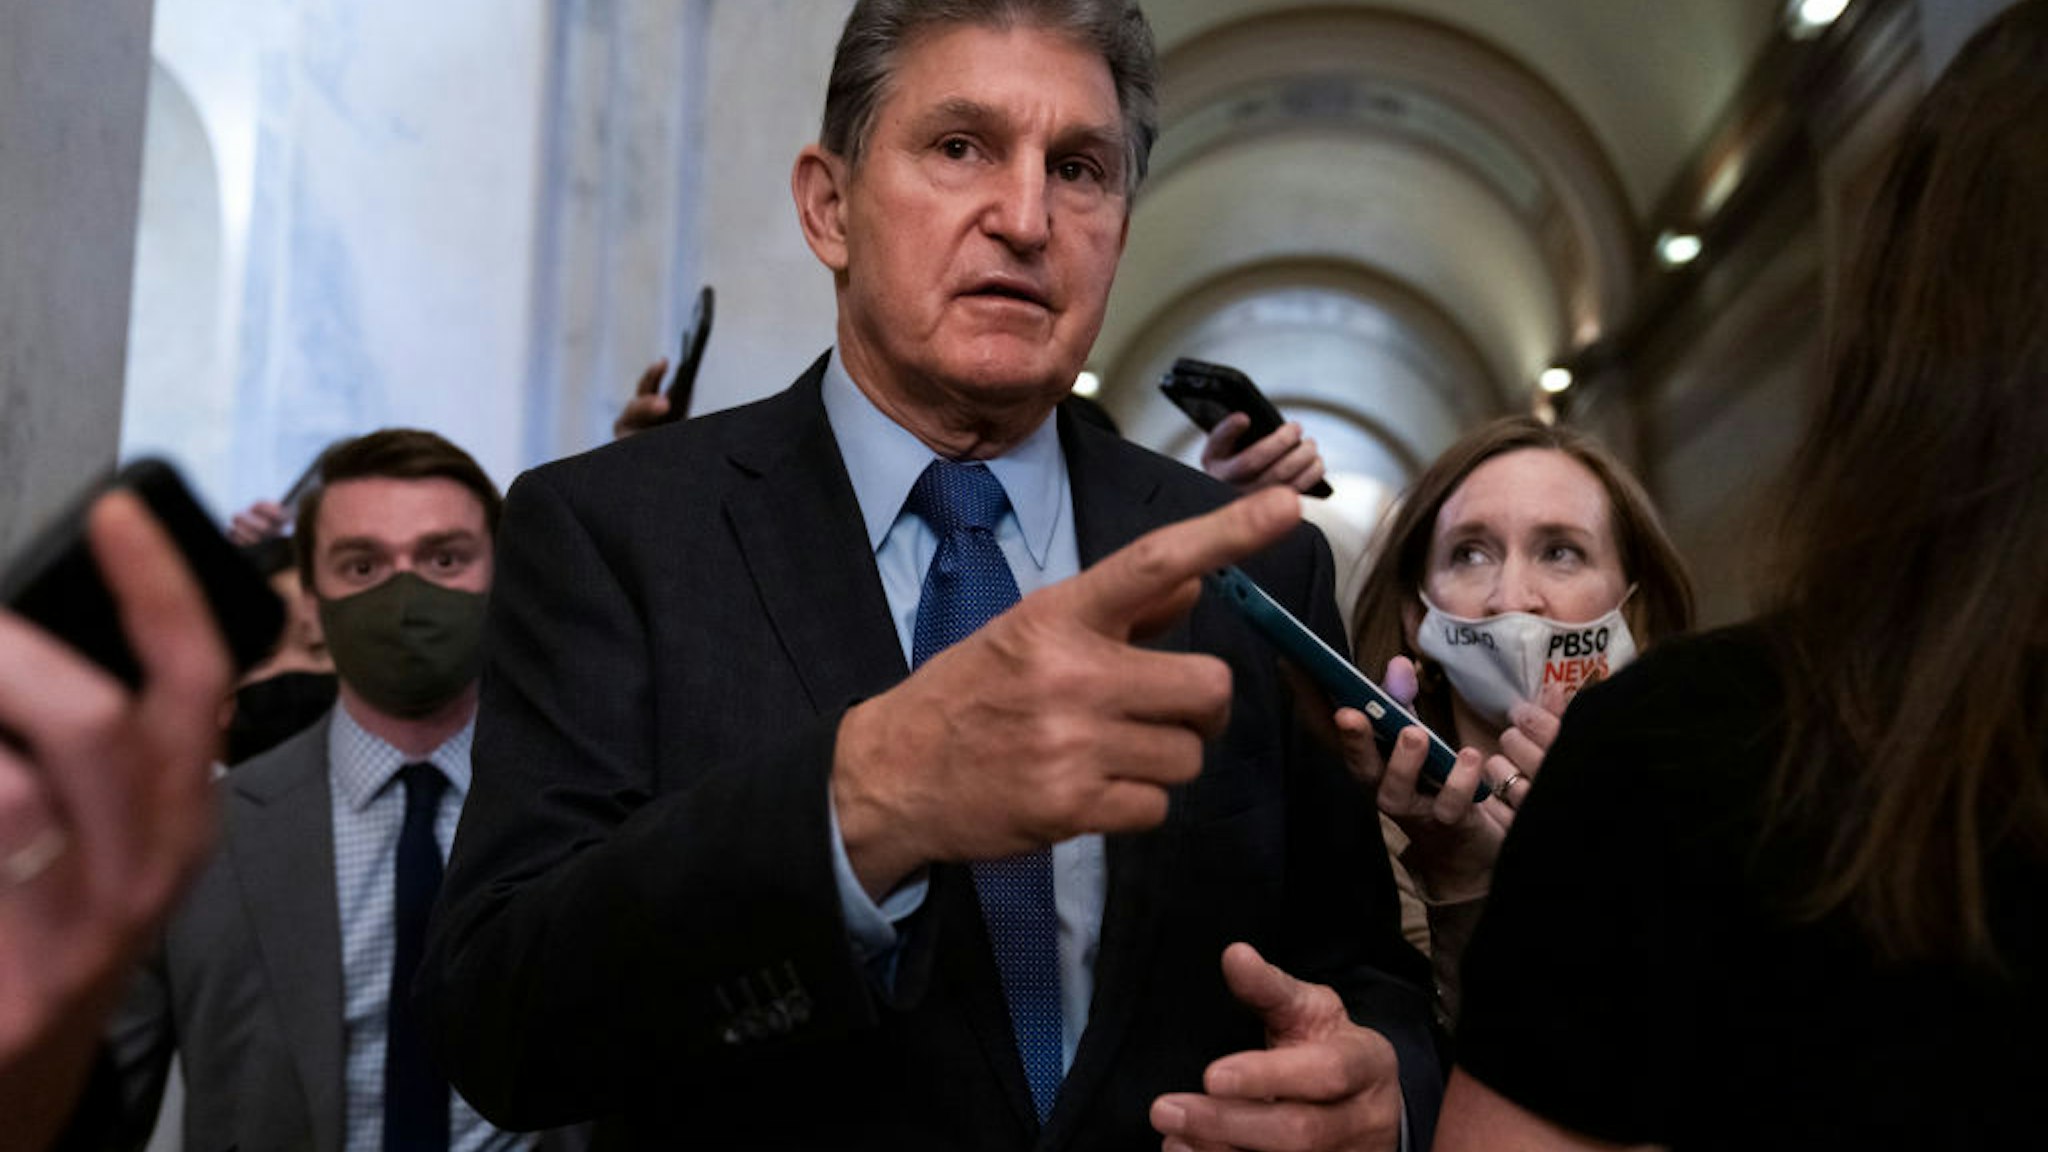 UNITED STATES - DECEMBER 15: Sen. Joe Manchin, D-W.Va., talks with reporters in the U.S. Capitol on Wednesday, December 15, 2021. (Photo By Tom Williams/CQ-Roll Call, Inc via Getty Images)